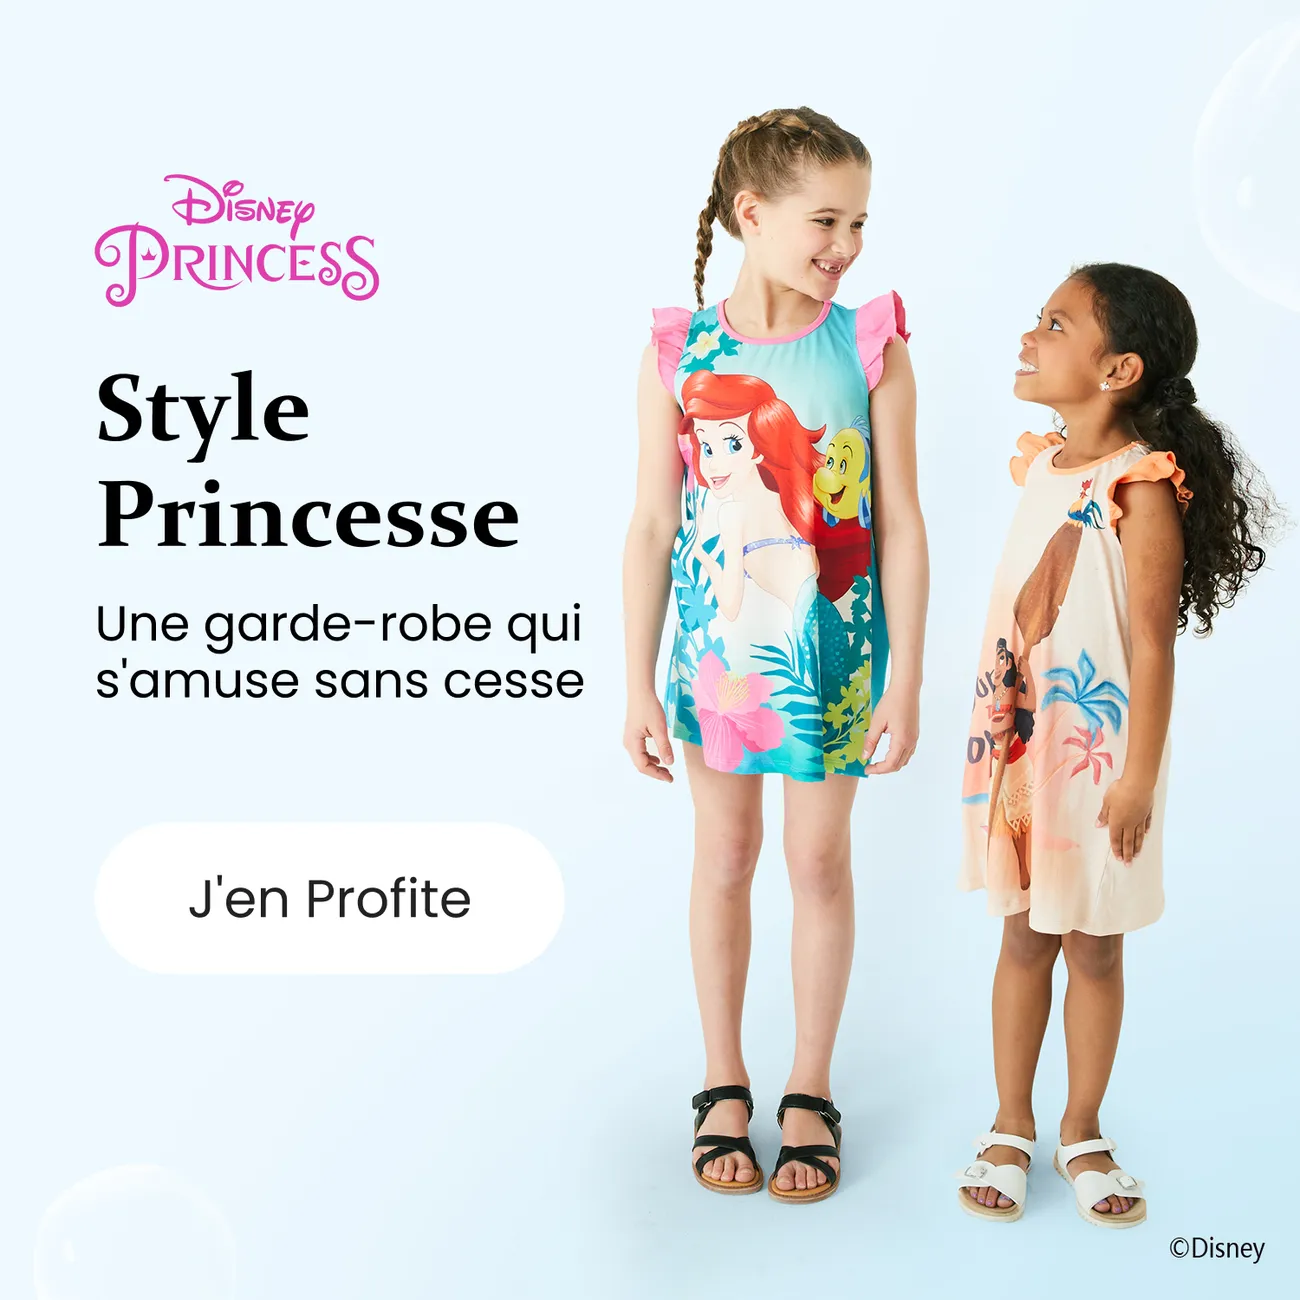 Click it to join Princess Style activity